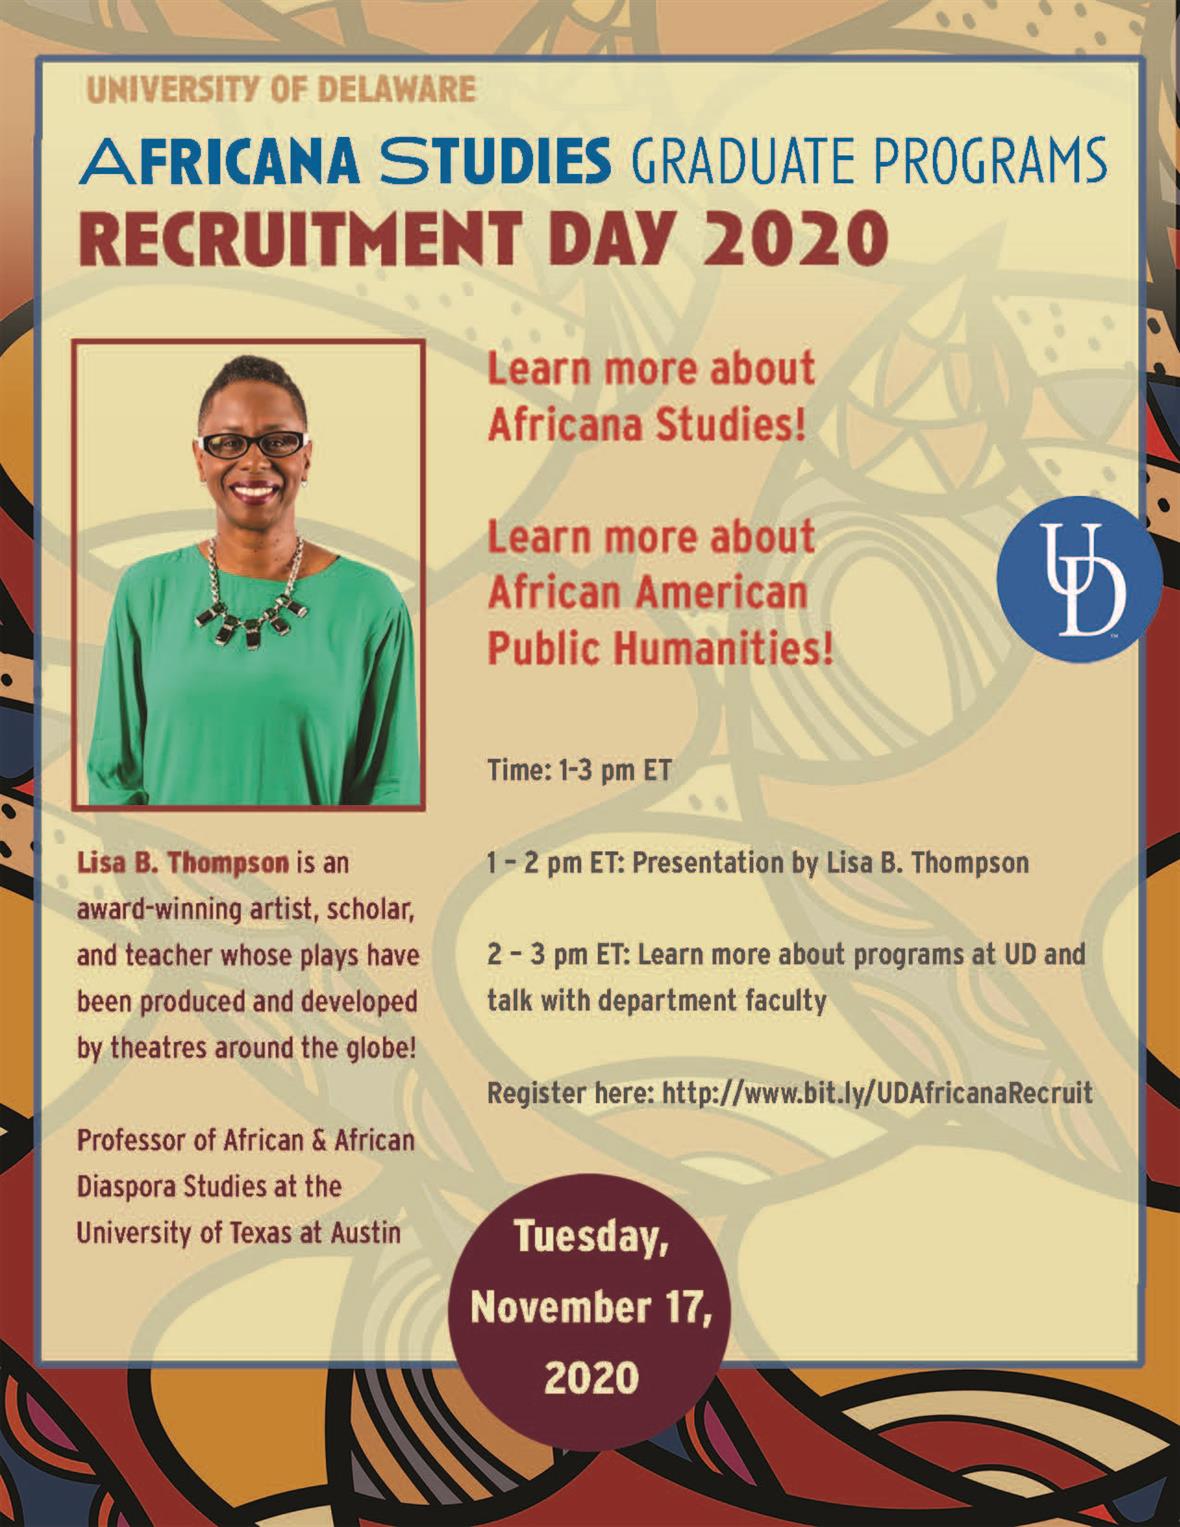 Colorful poster with picture of scholar and playwright Lisa B. Thompson announcing 2020 AFRA@UD Grad Recruitment Day for November 17.